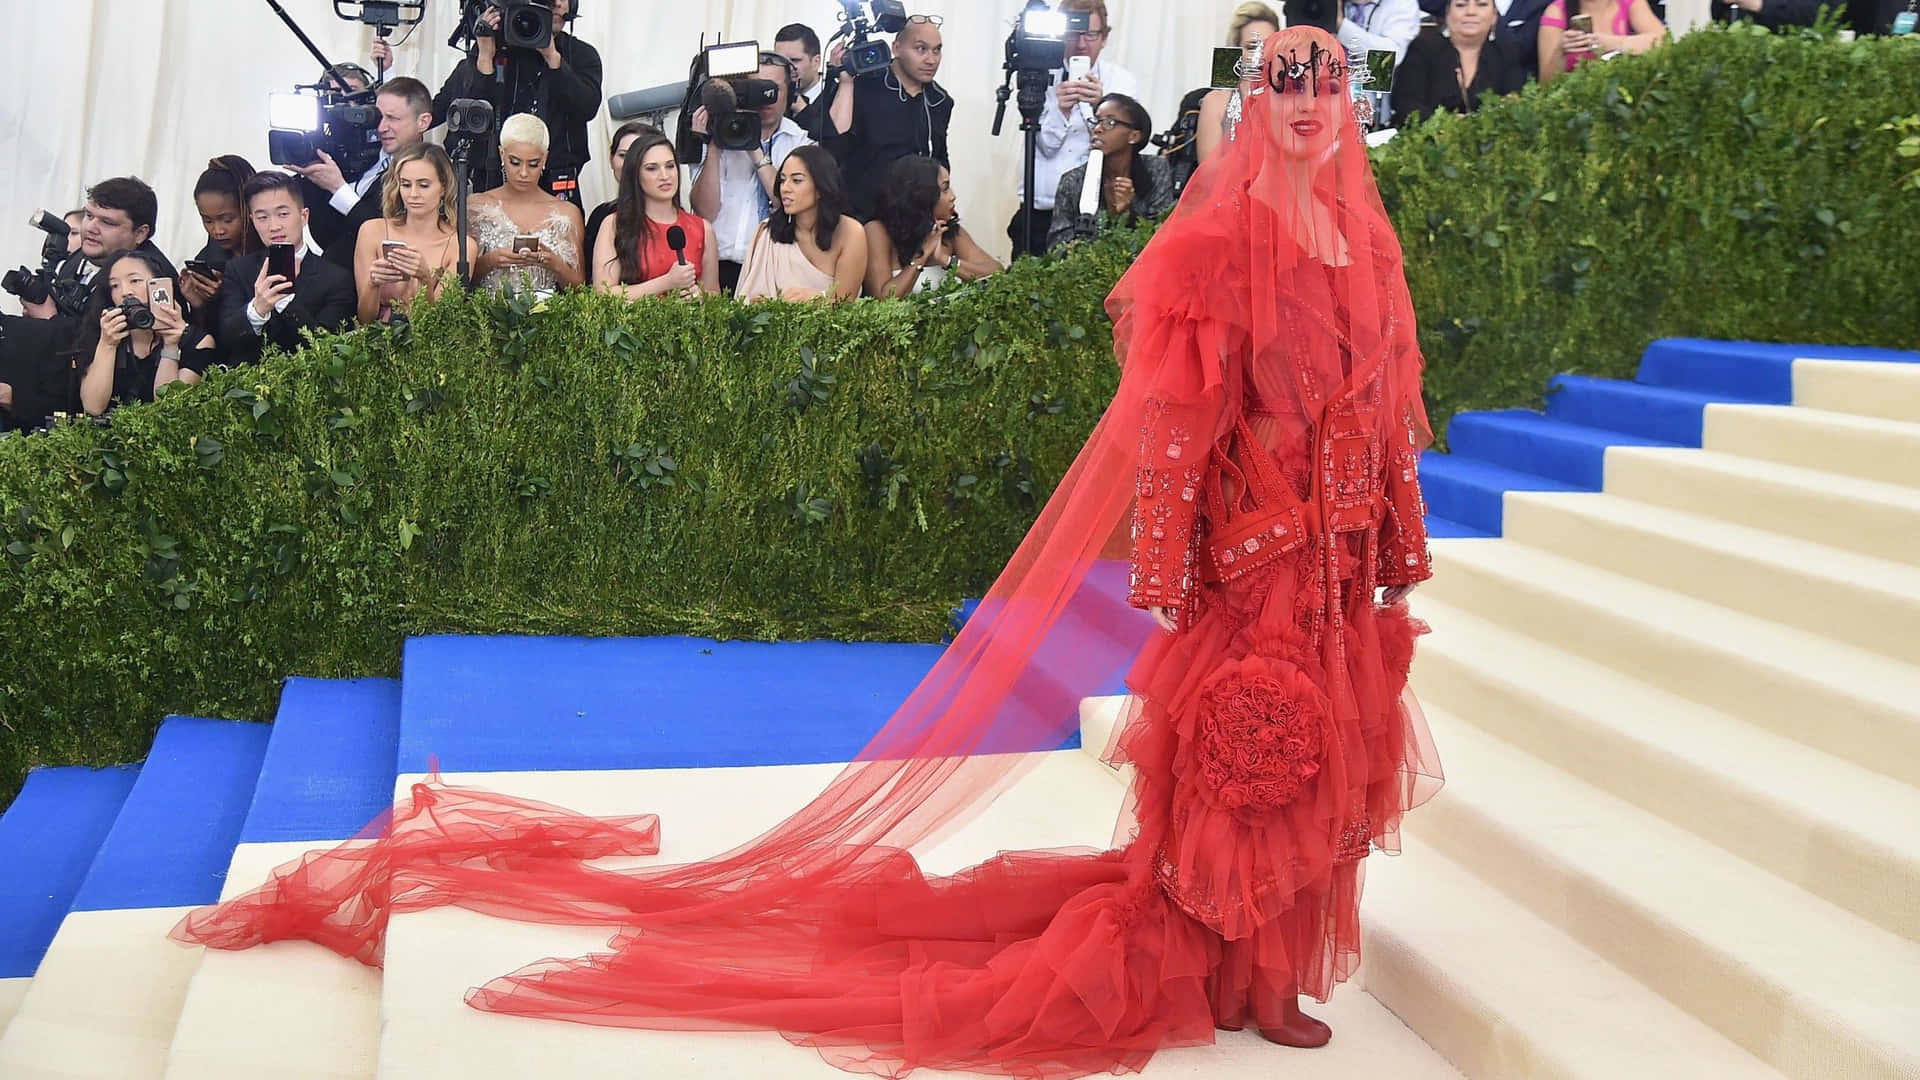 Celebrities attend the 72nd Annual Met Gala in New York City